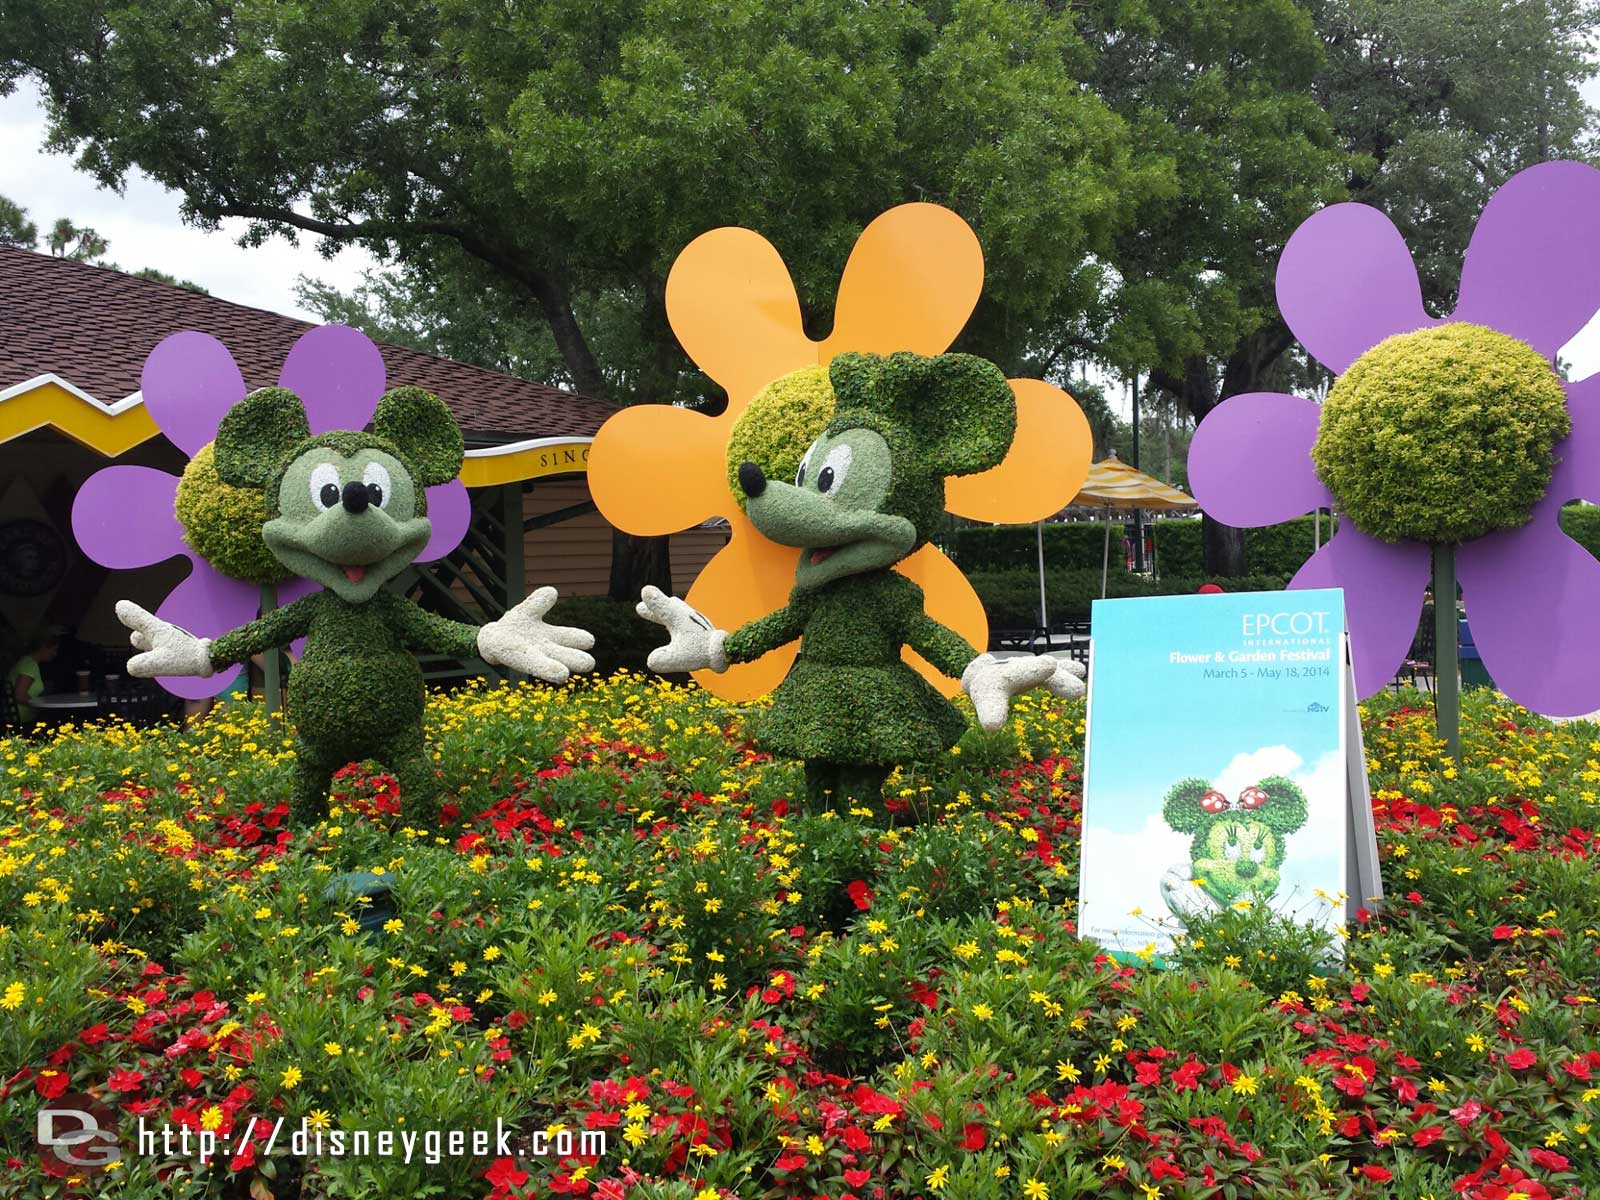 Mickey & Minnie Topiaries advertising the Epcot Flower and Garden Festival